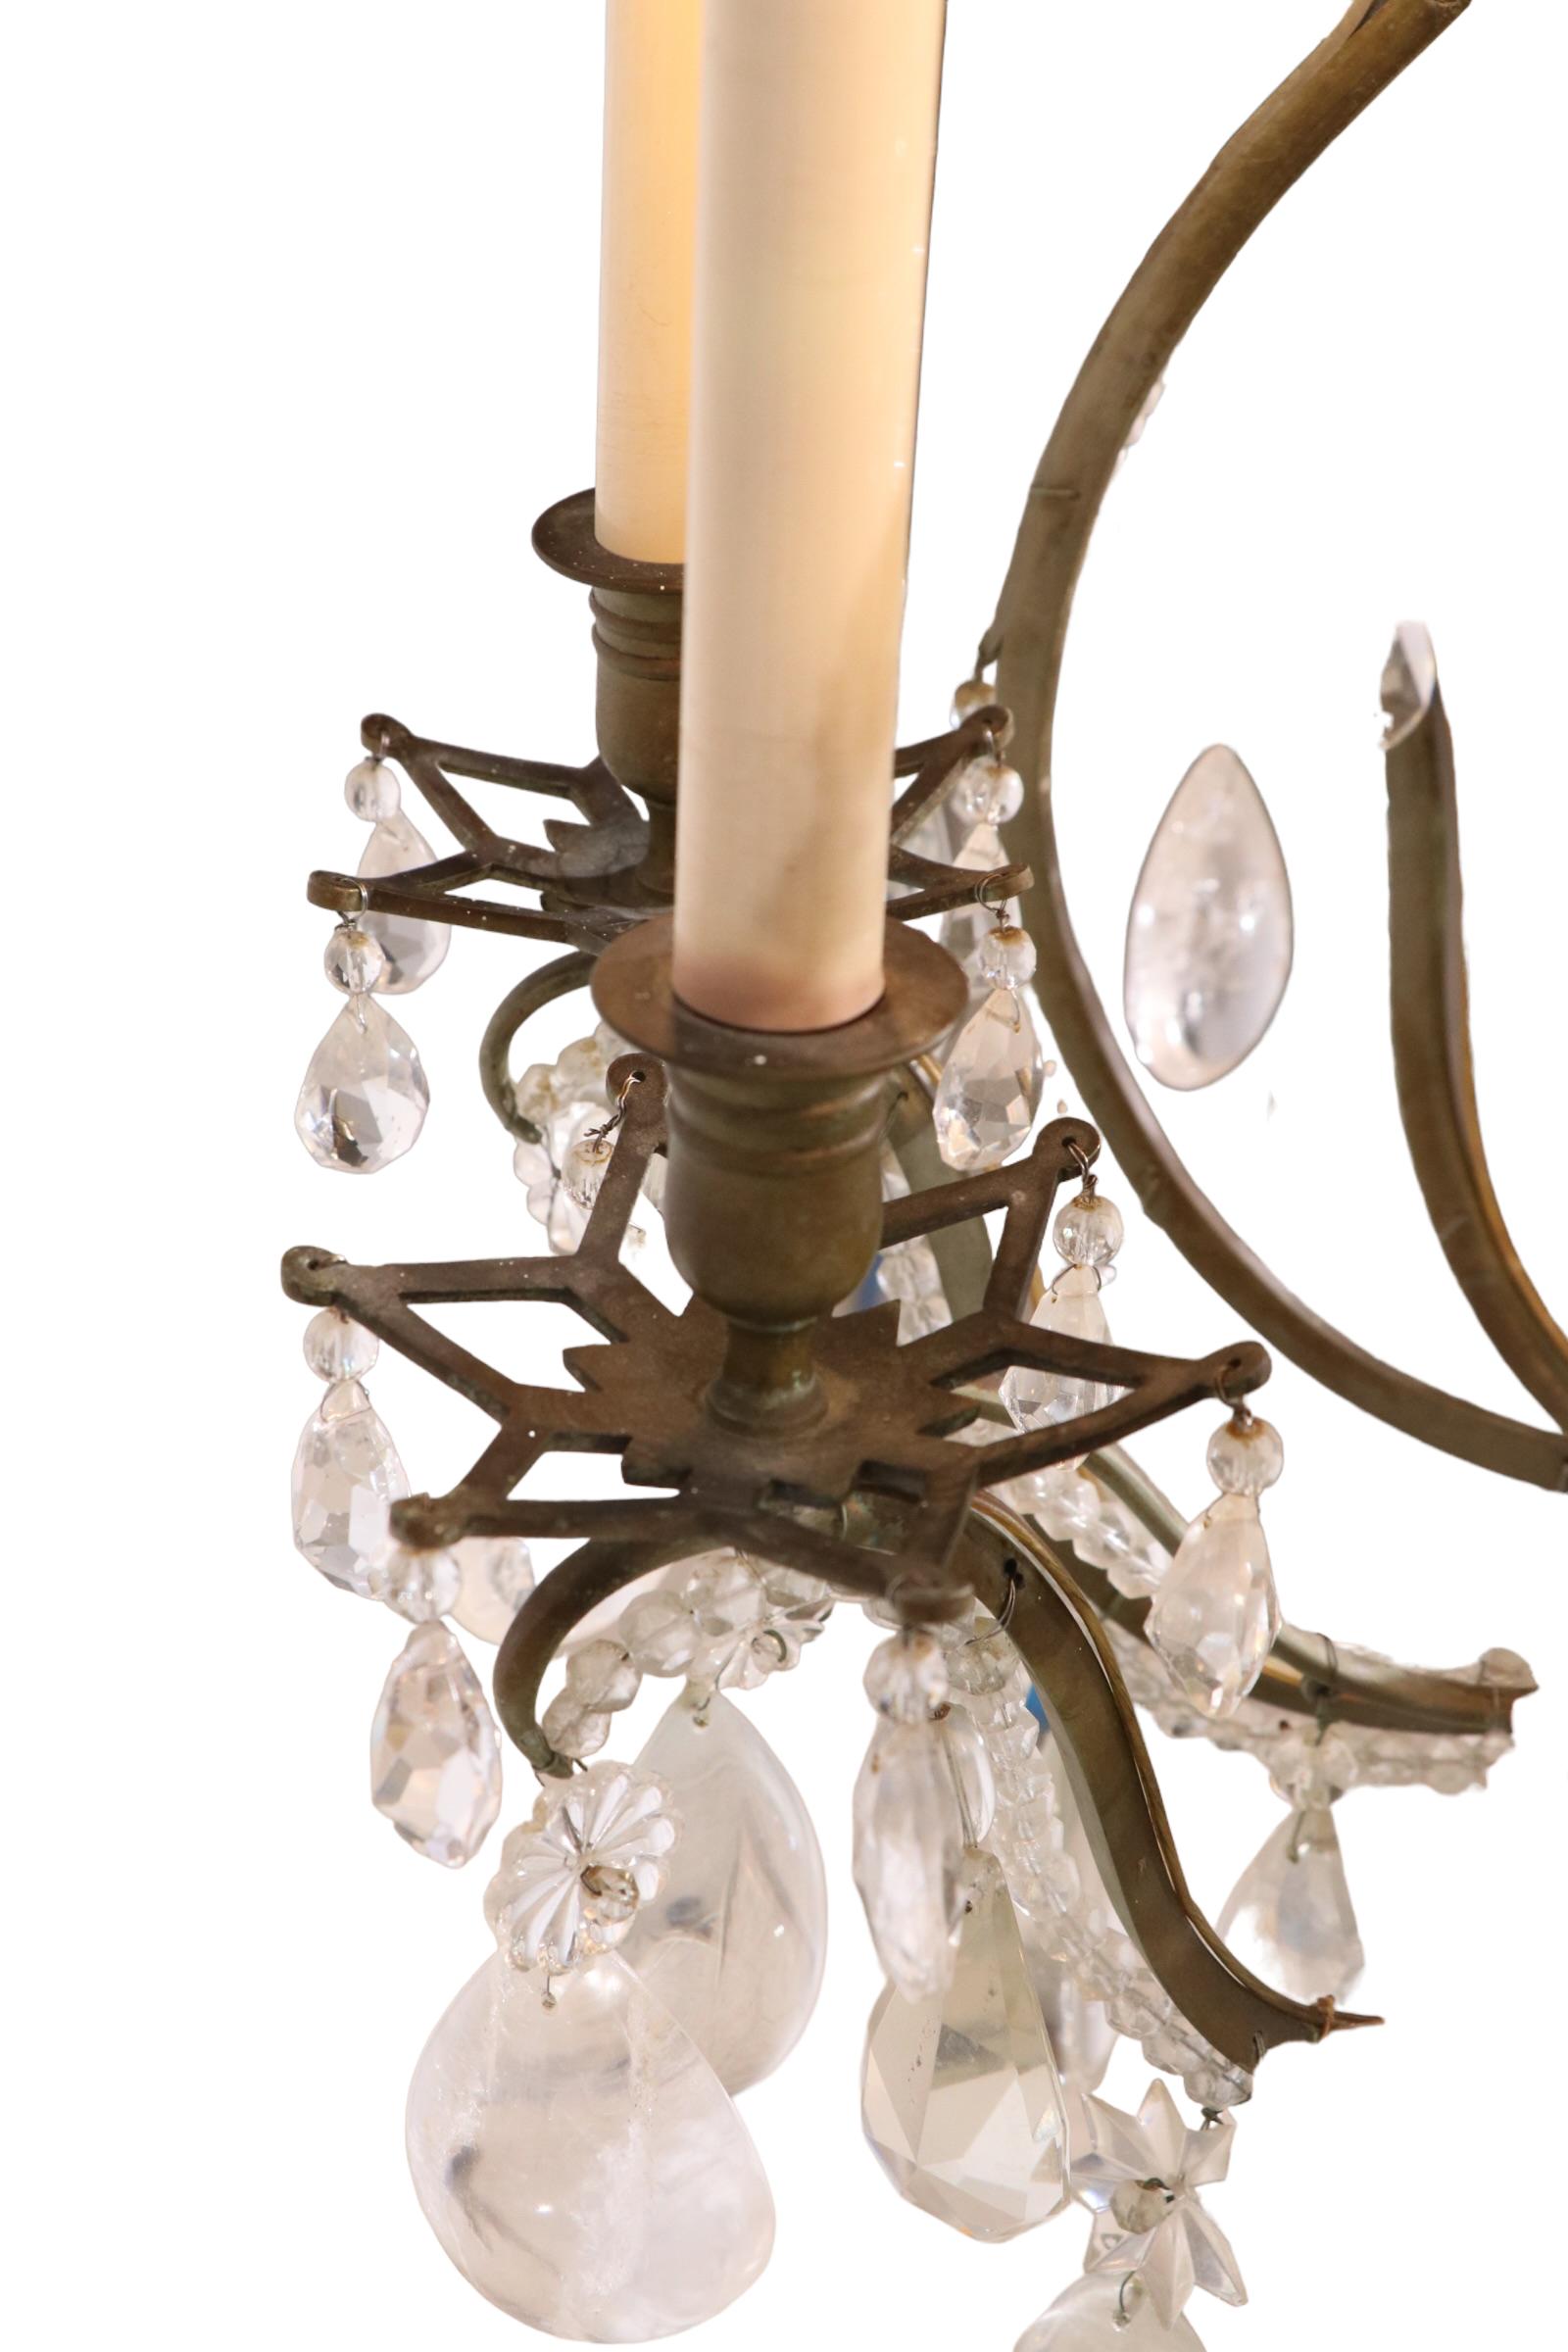 Formal Chandelier with Rock Crystal Drops by Charles J. Winston For Sale 6